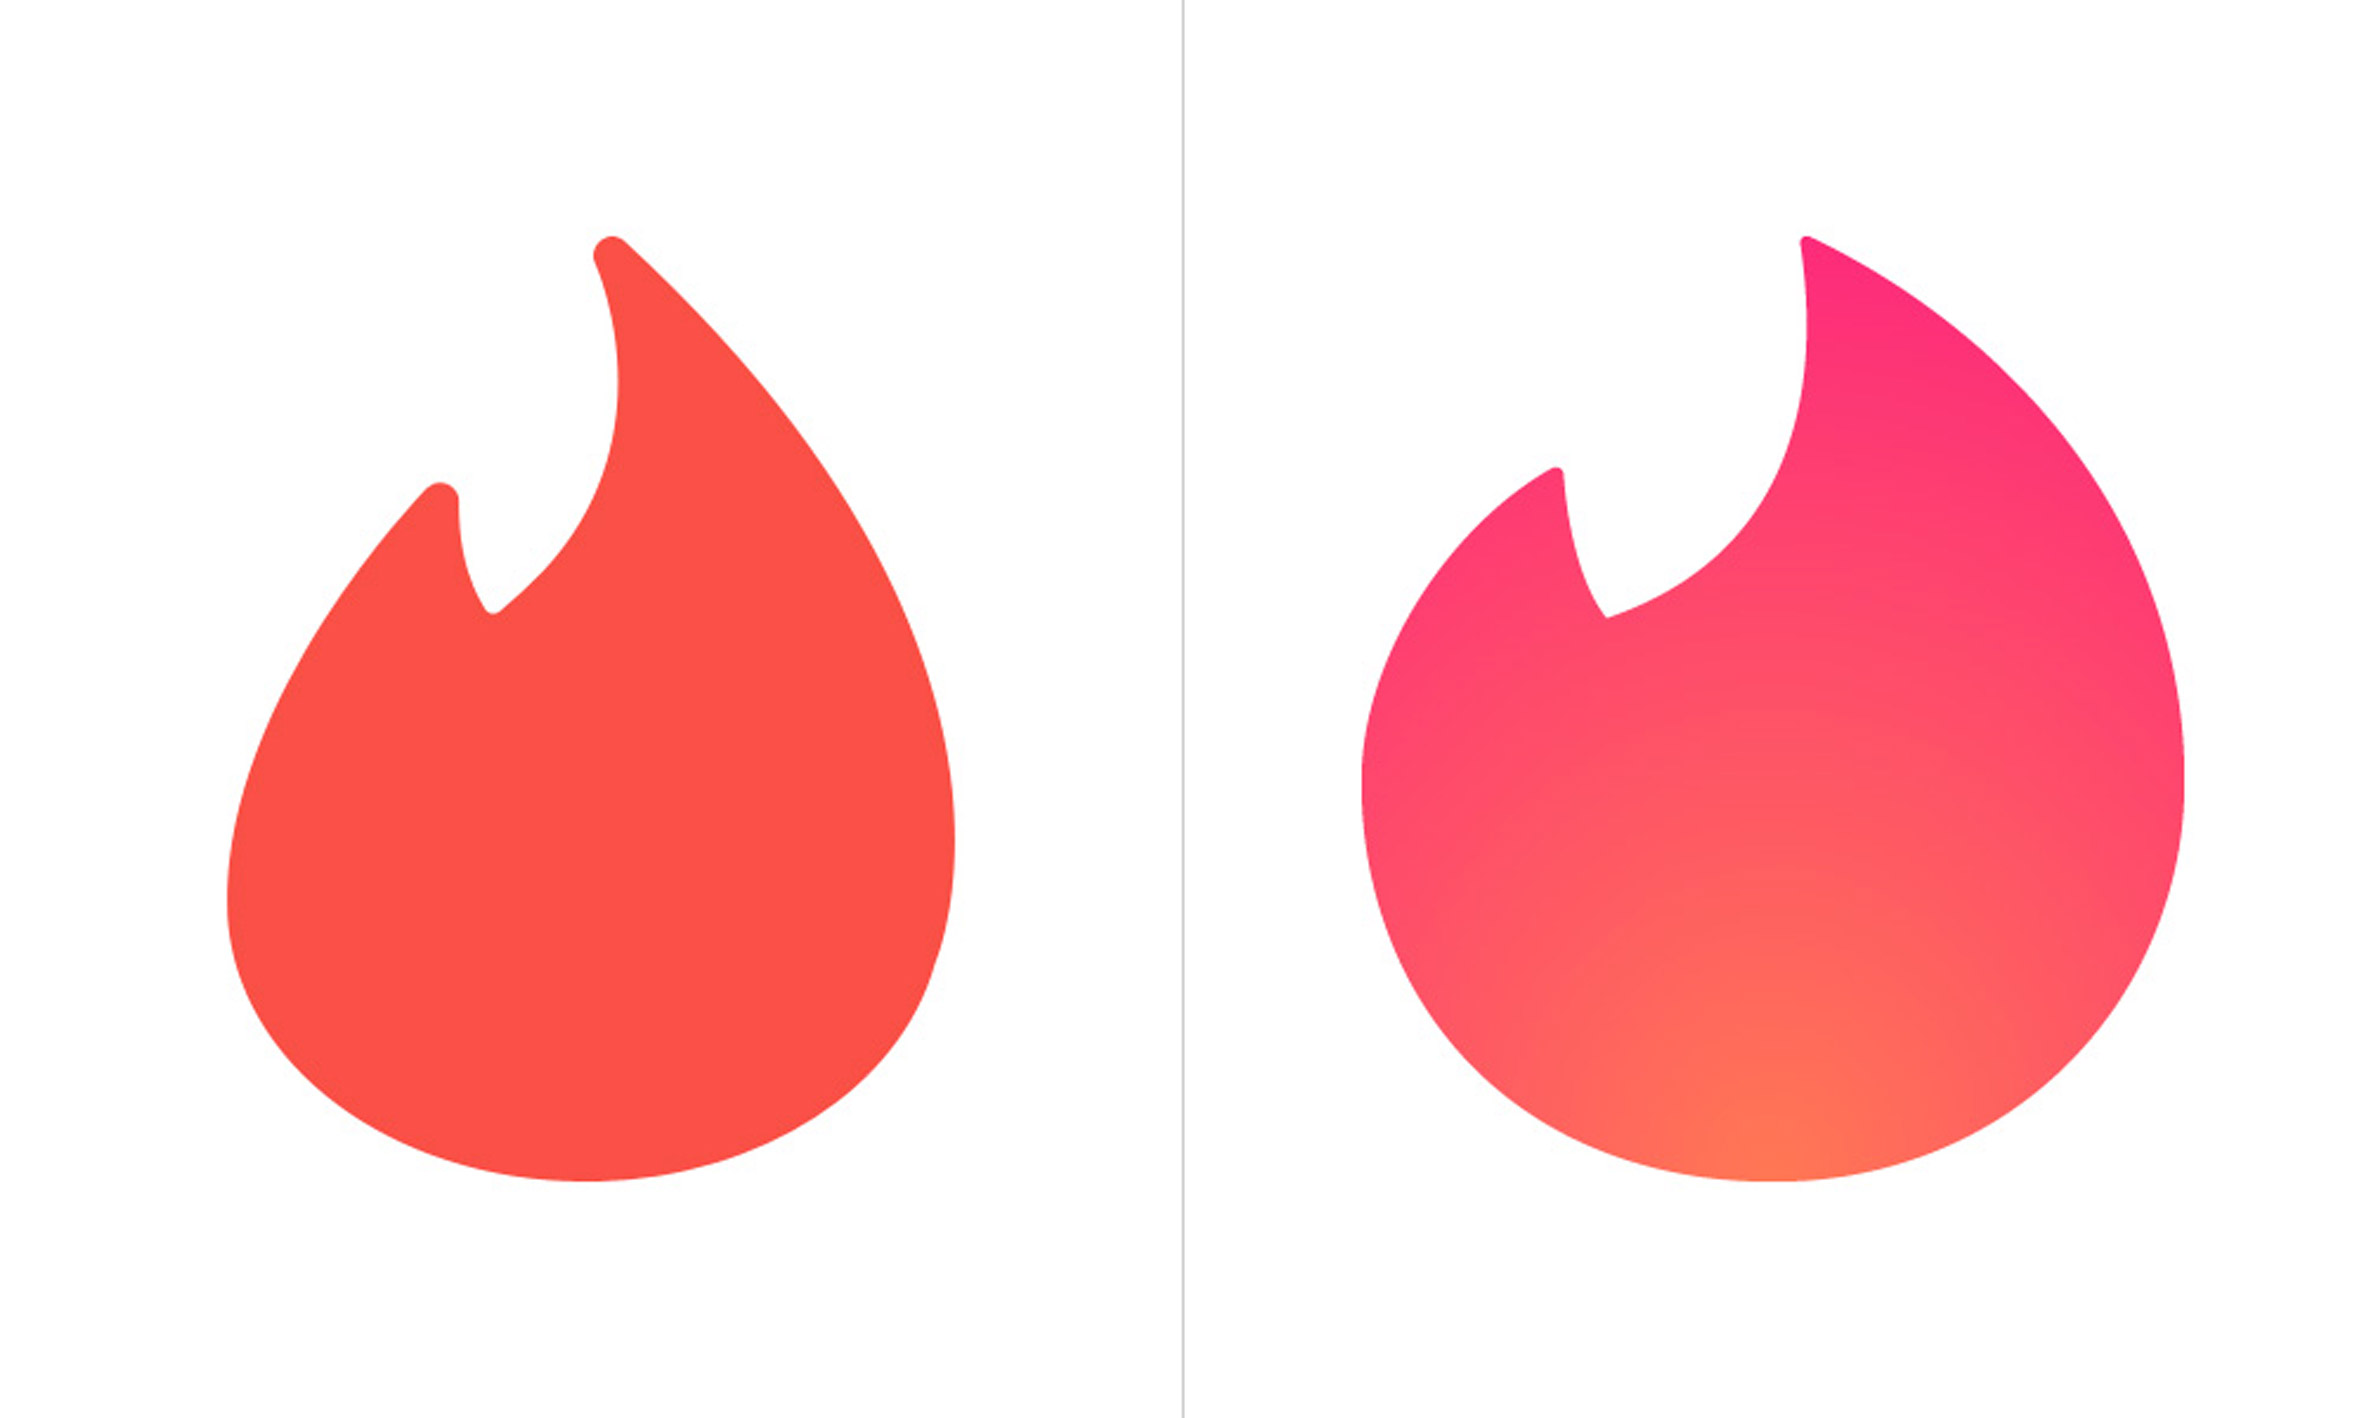 What apps have a flame icon?